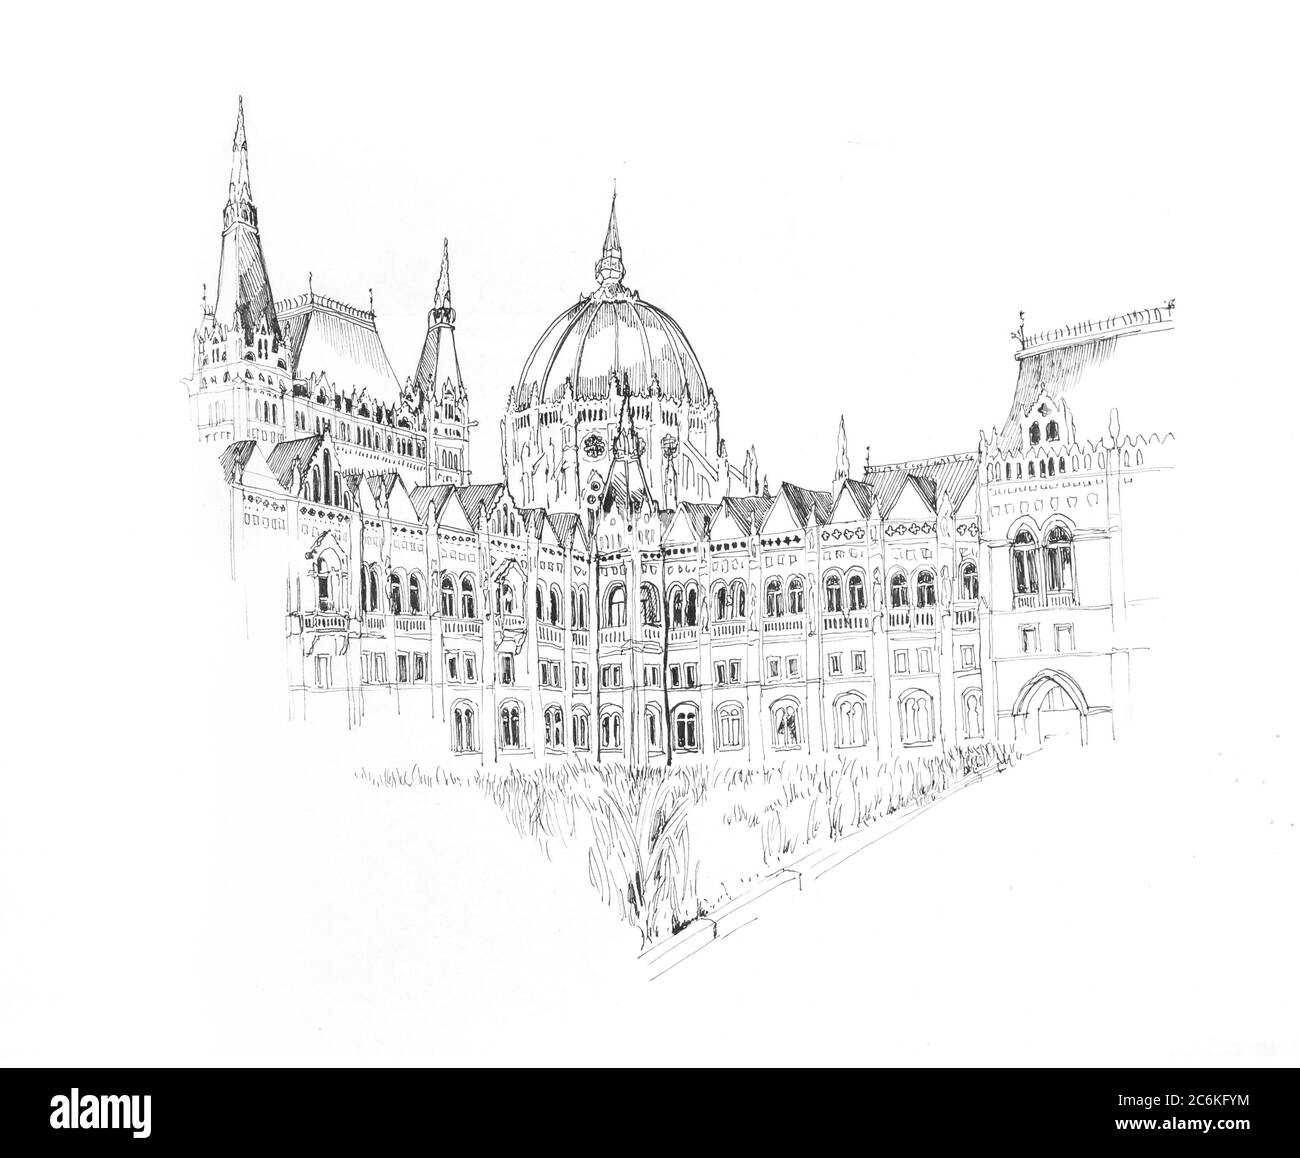 Hand drawn ink sketch of Budapest's Parlament building, outline illustration on white background Stock Photo